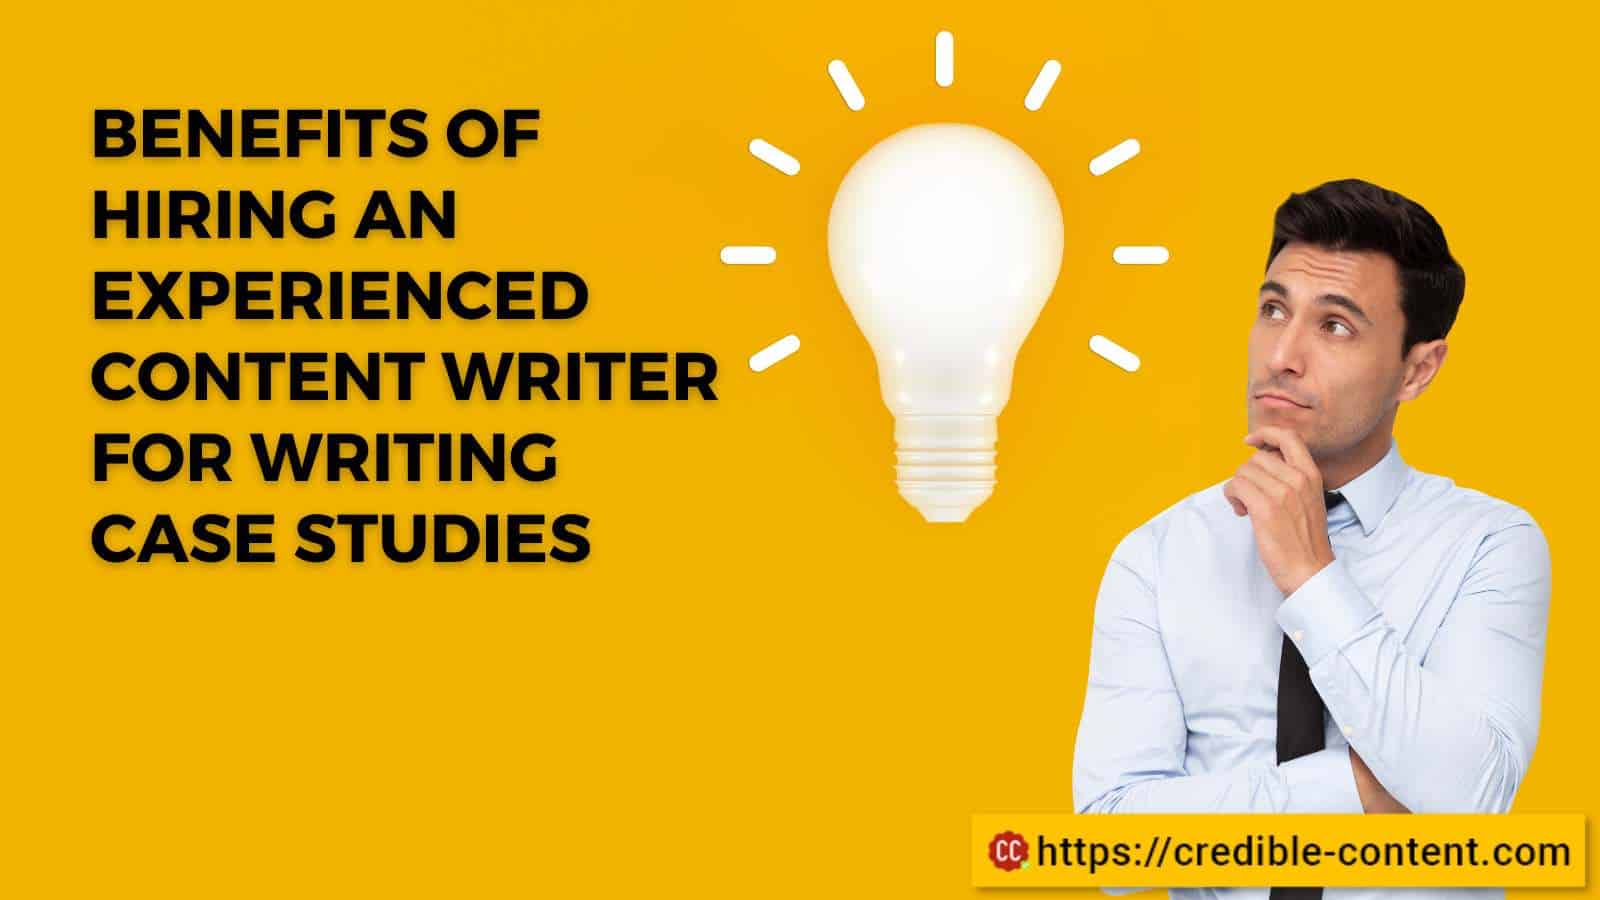 Benefits of hiring an experienced content writer for writing case studies